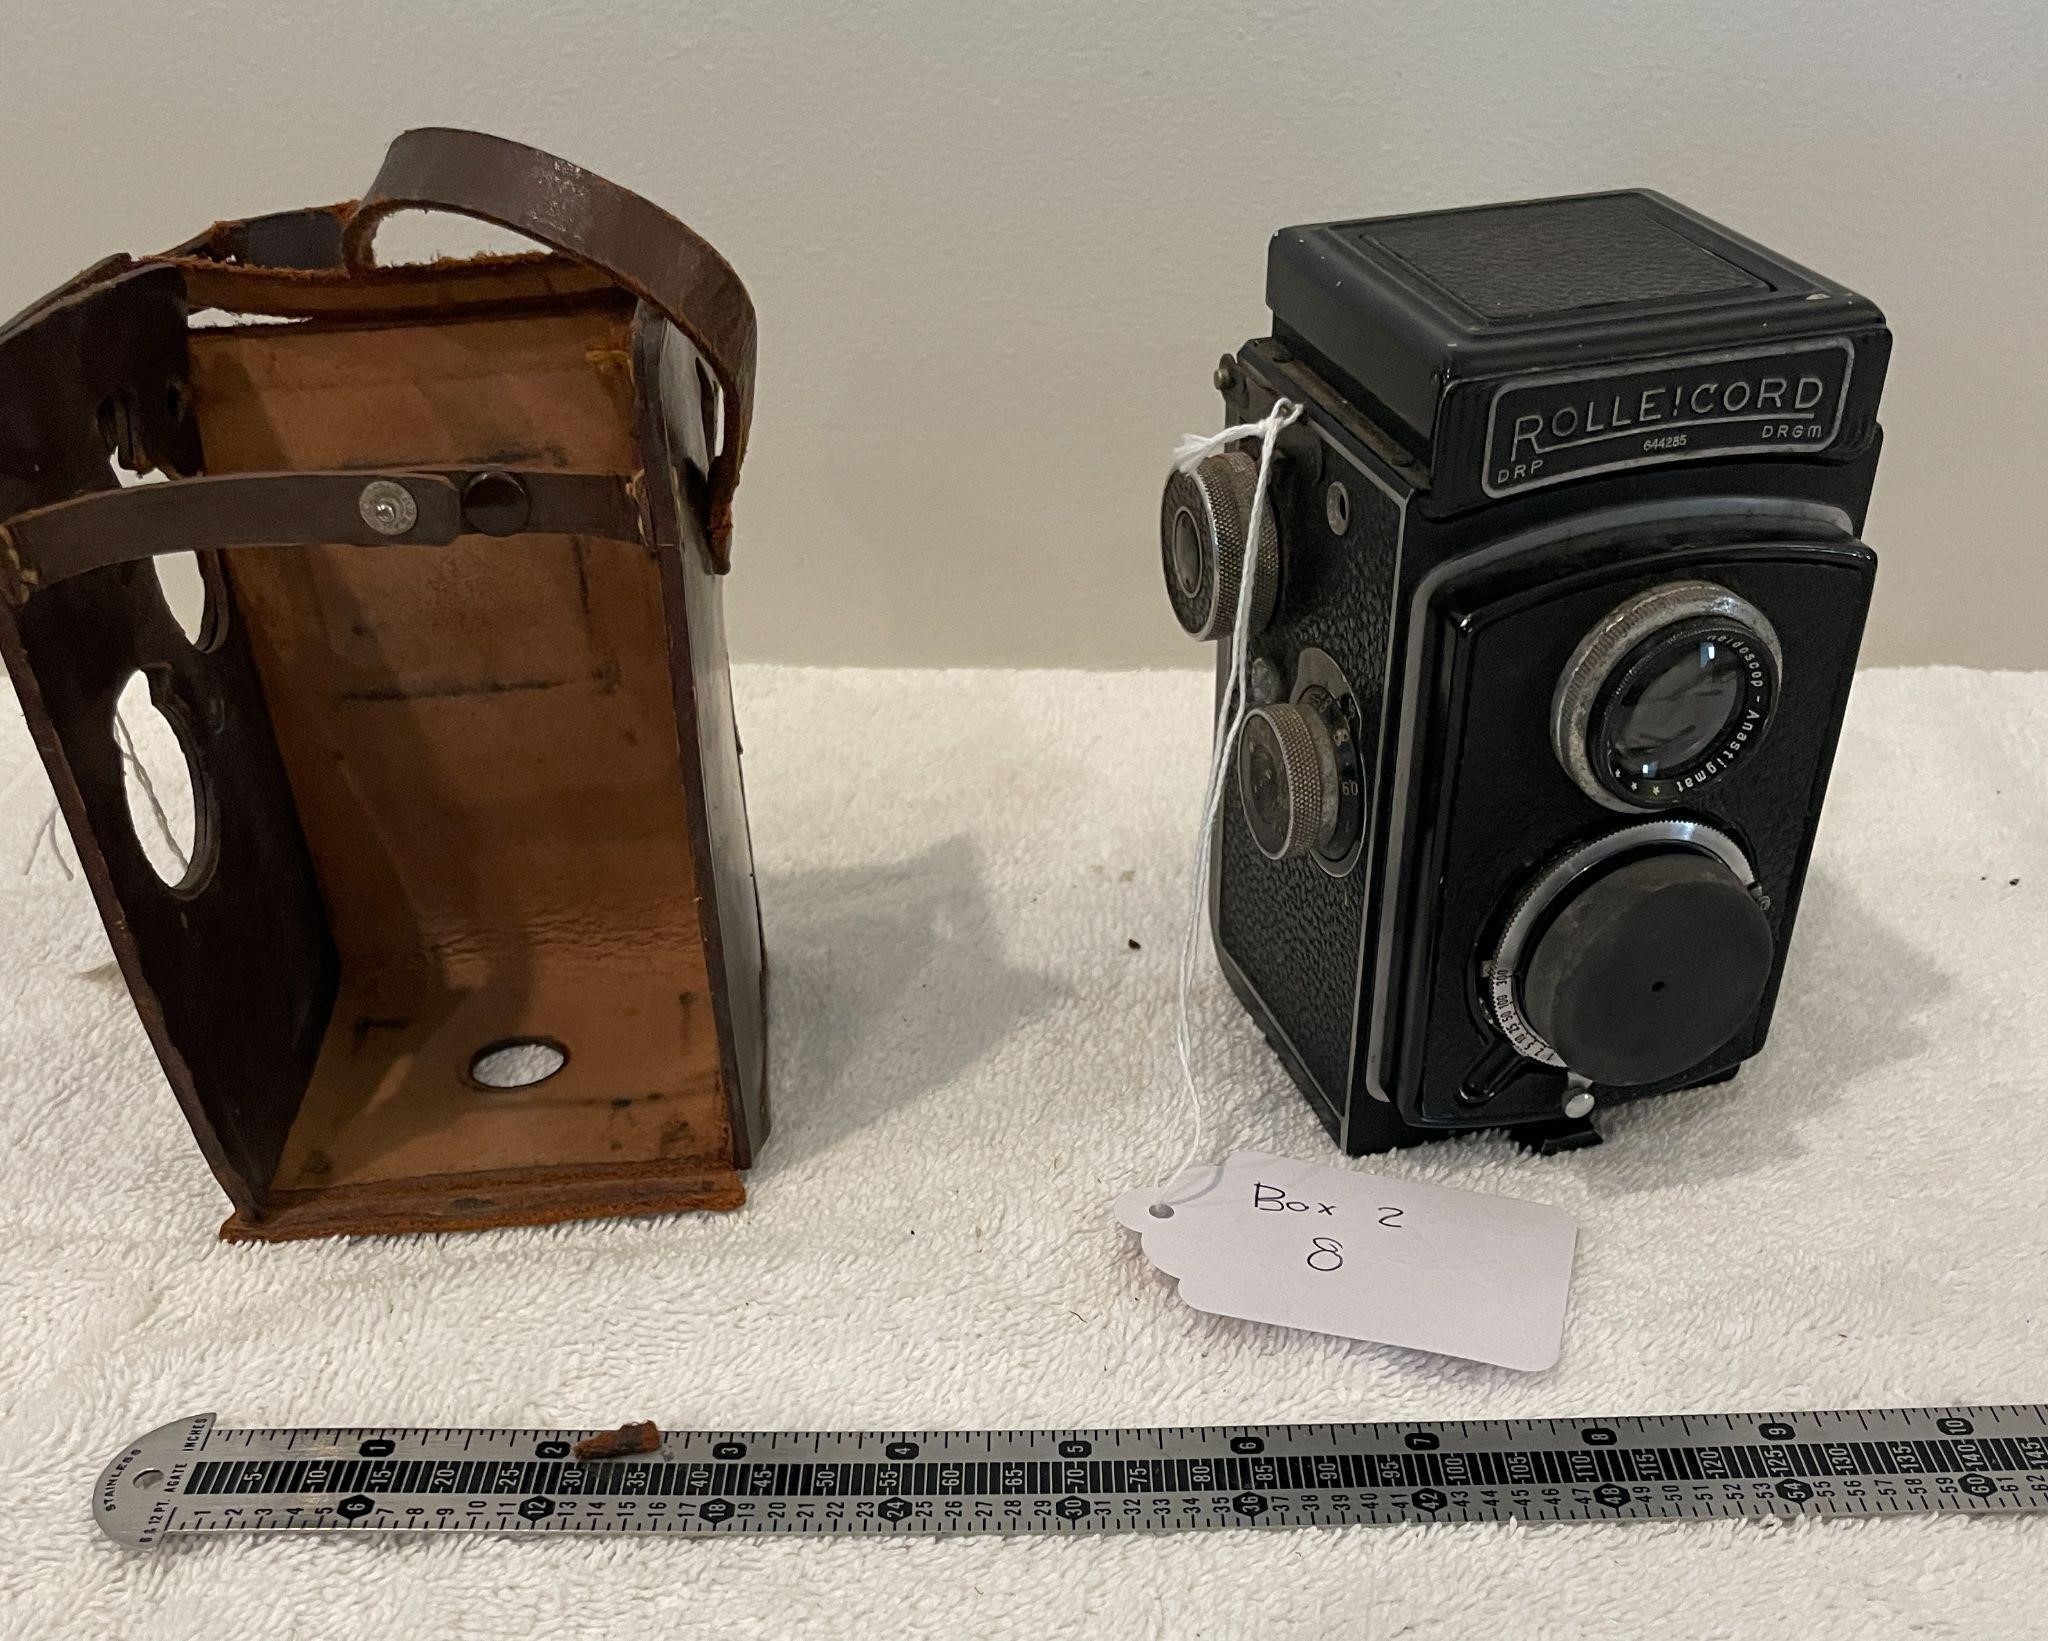 Rolliecord DRP Box Camera with leather case